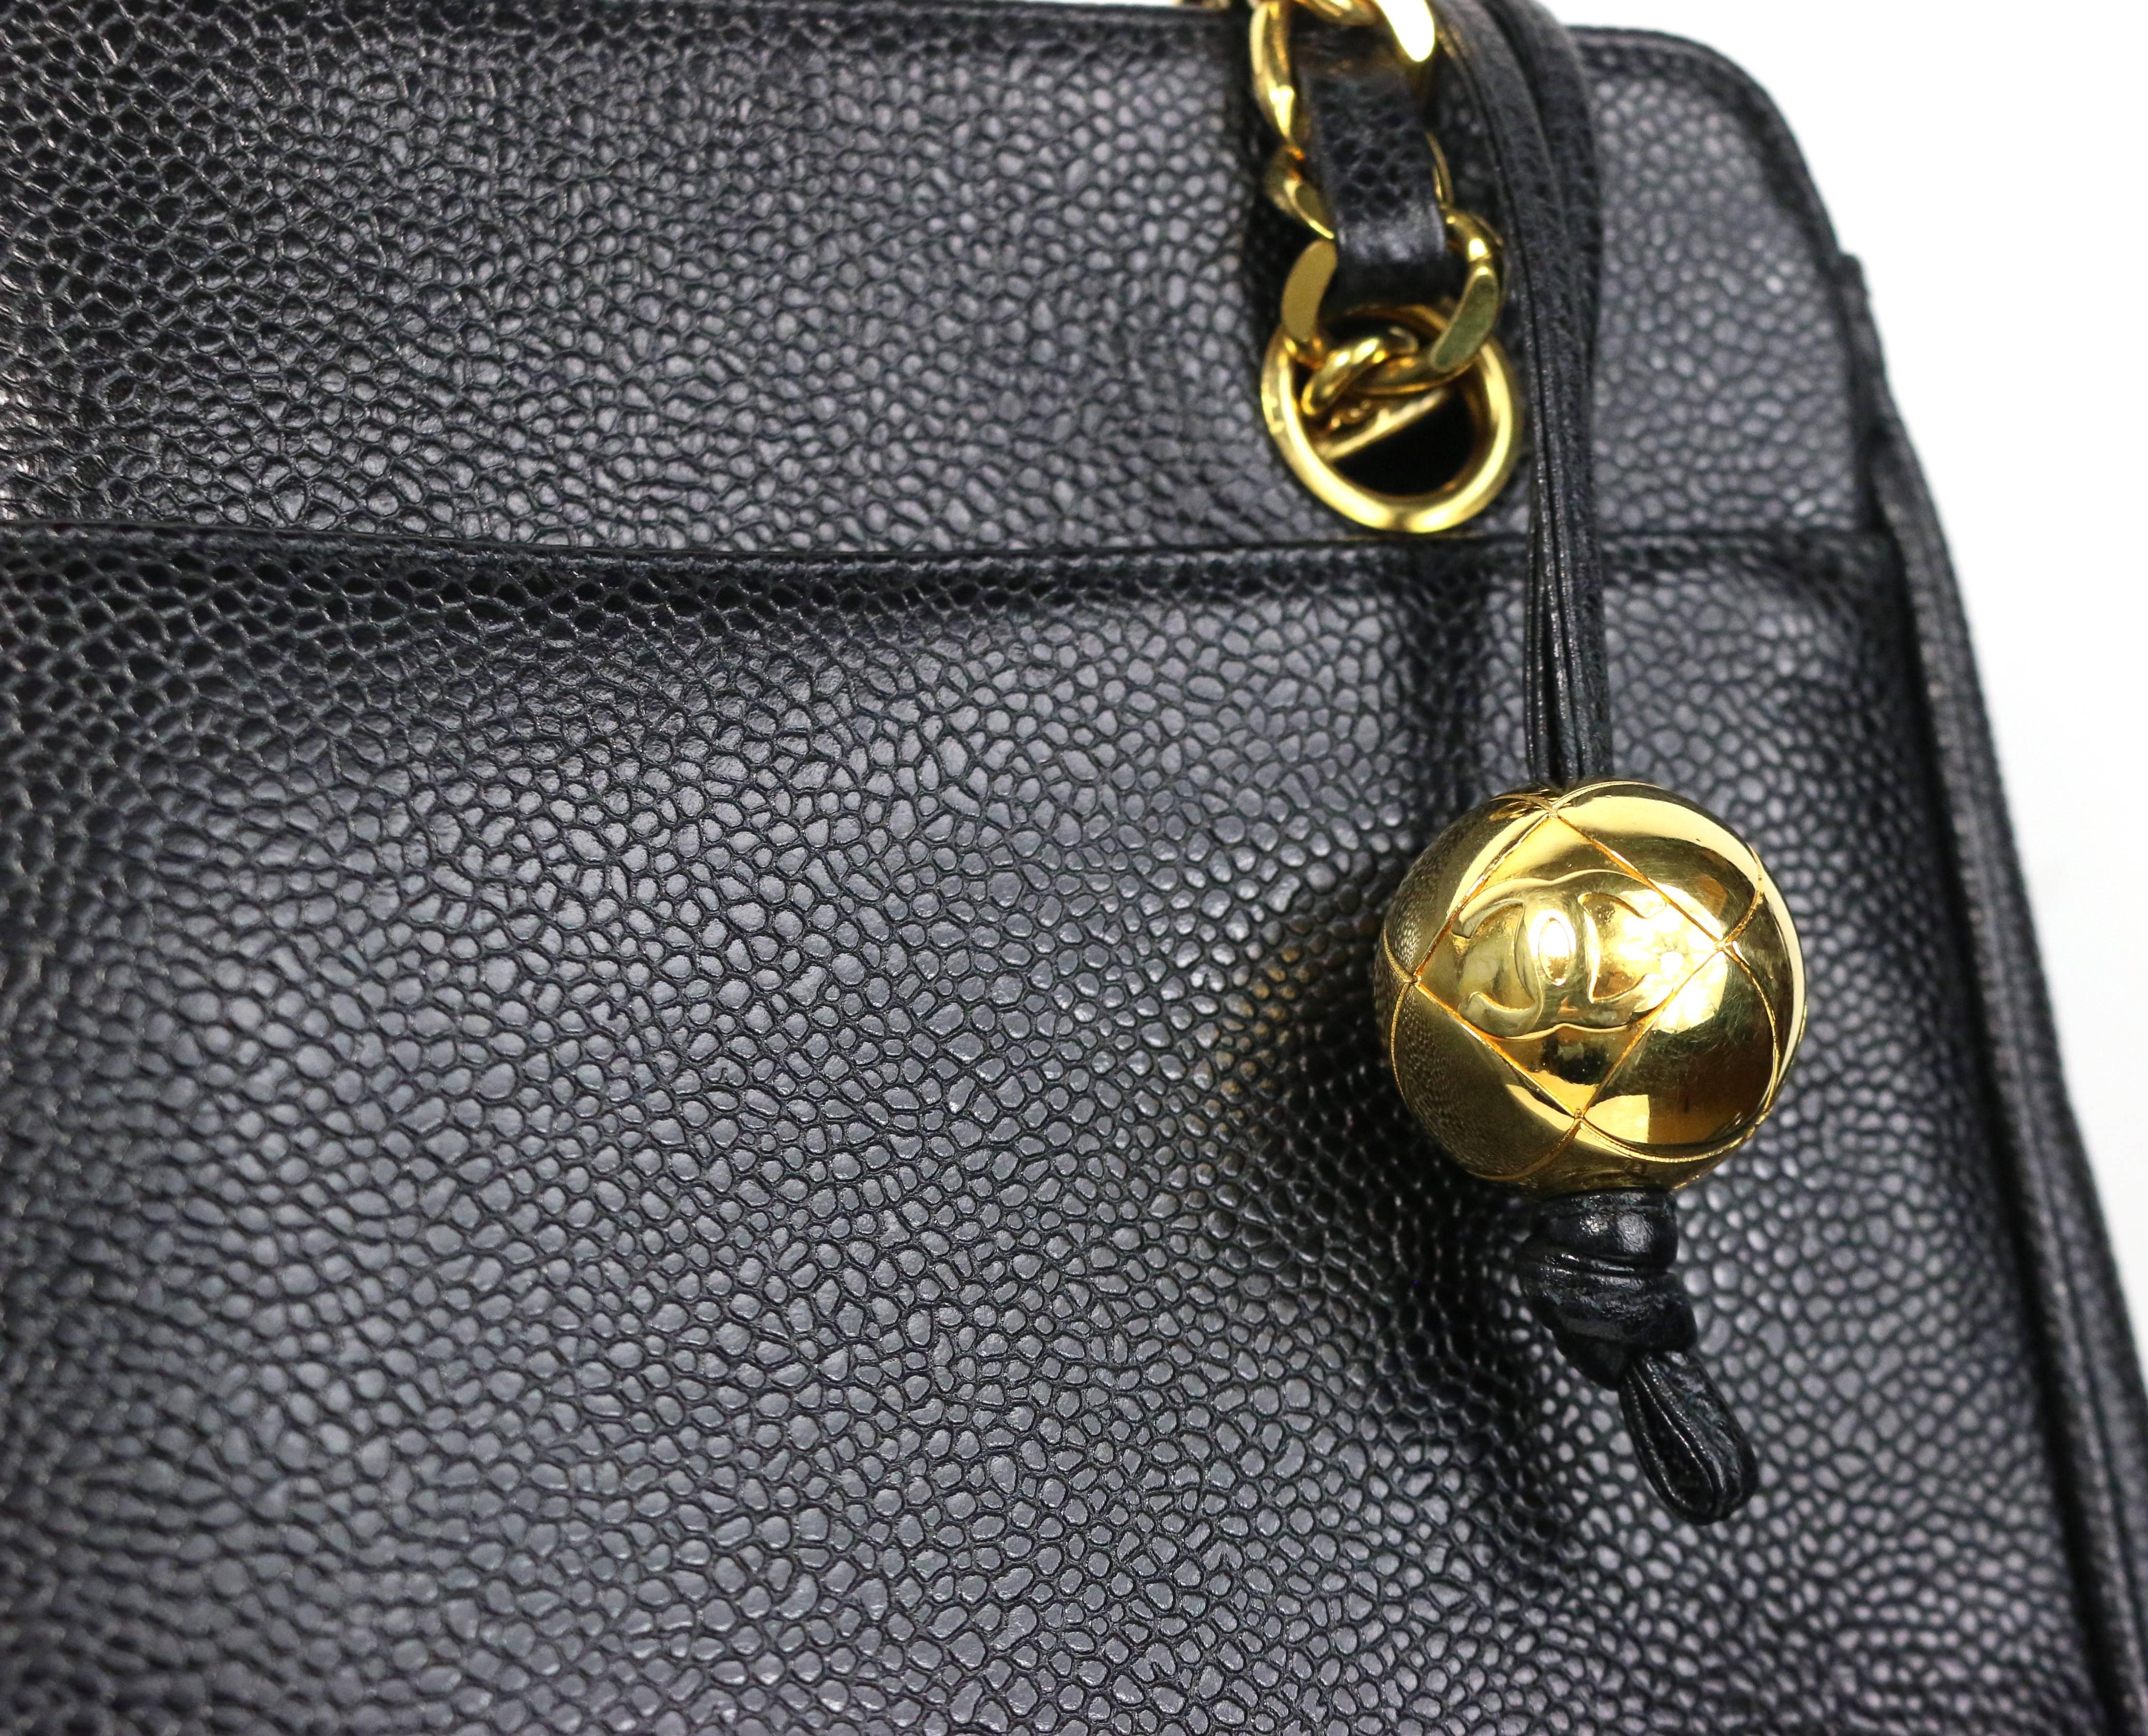 - Vintage 90s Chanel black caviar leather  gold chain shoulder bag. Its one of the Chanel classic bag in the 90s. 

- Front and back gold toned 